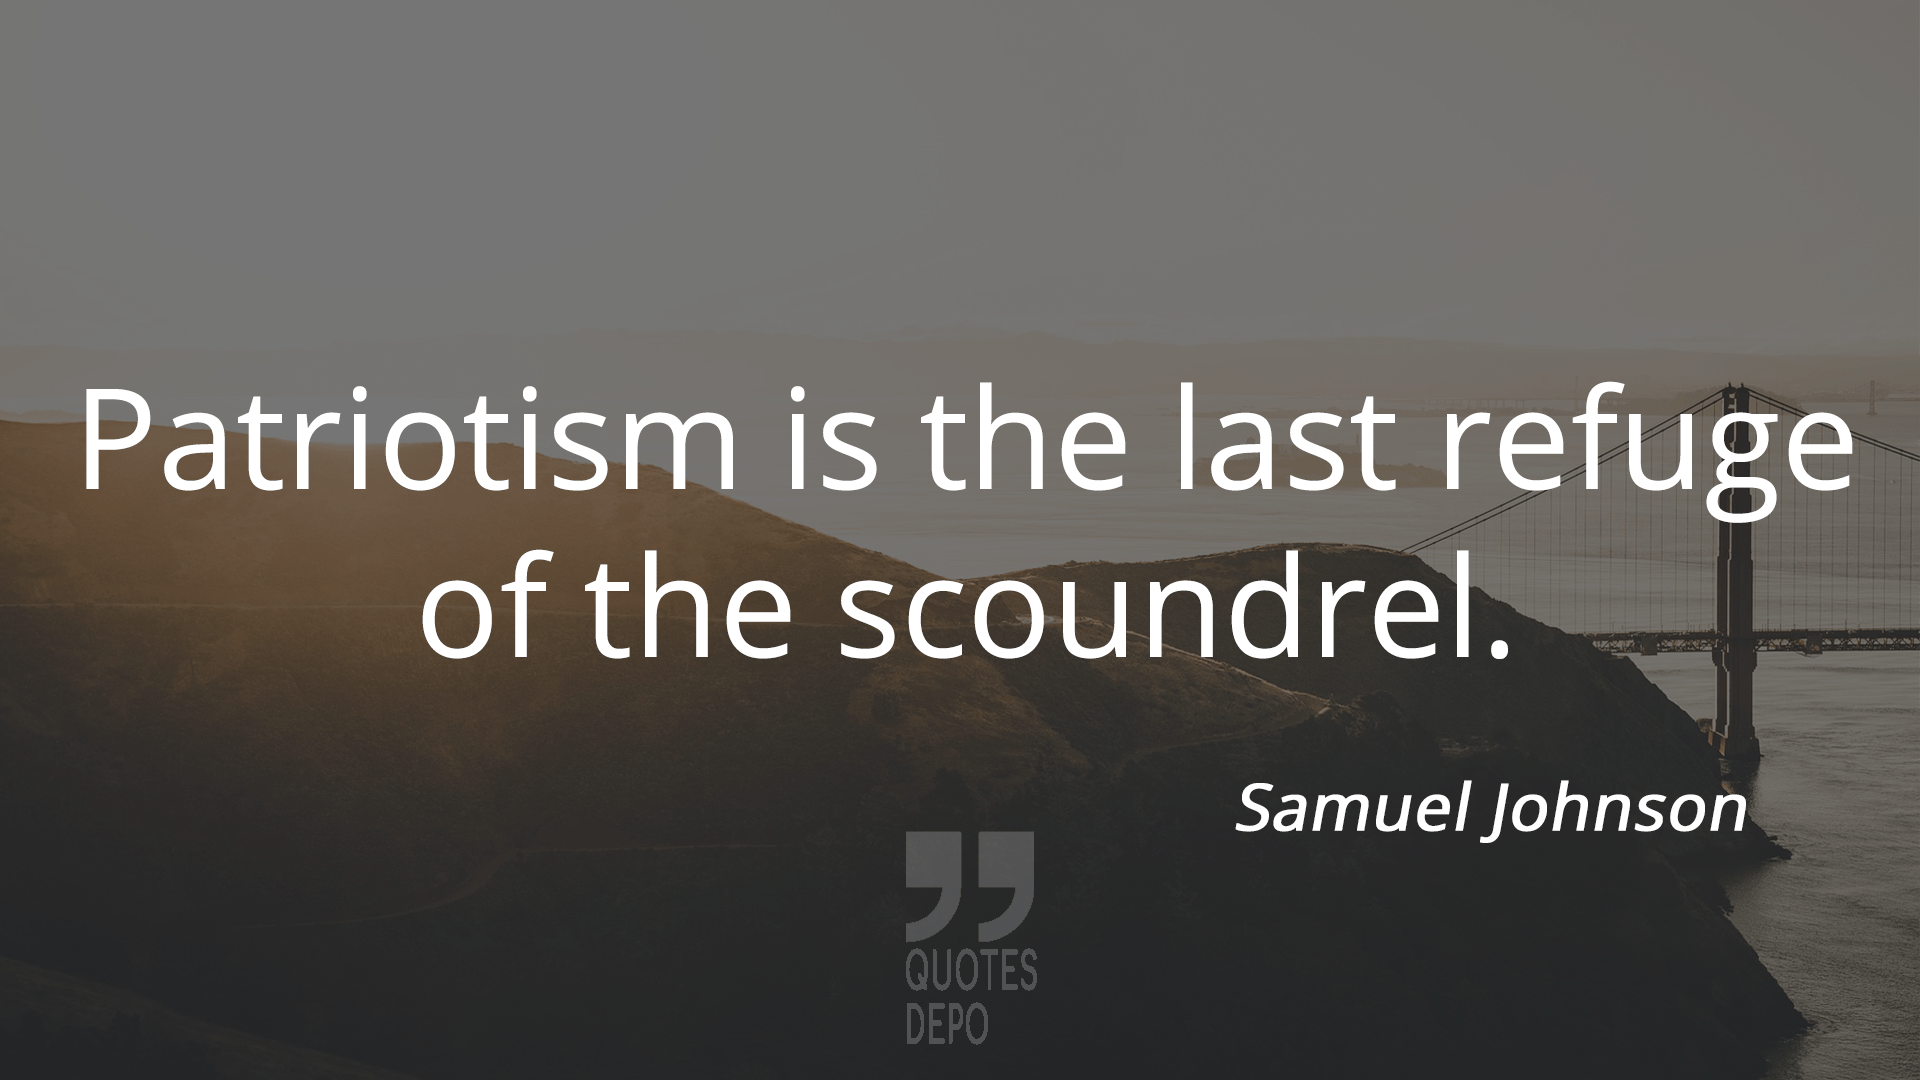 patriotism is the last refuge of the scoundrel - samuel johnson quotes